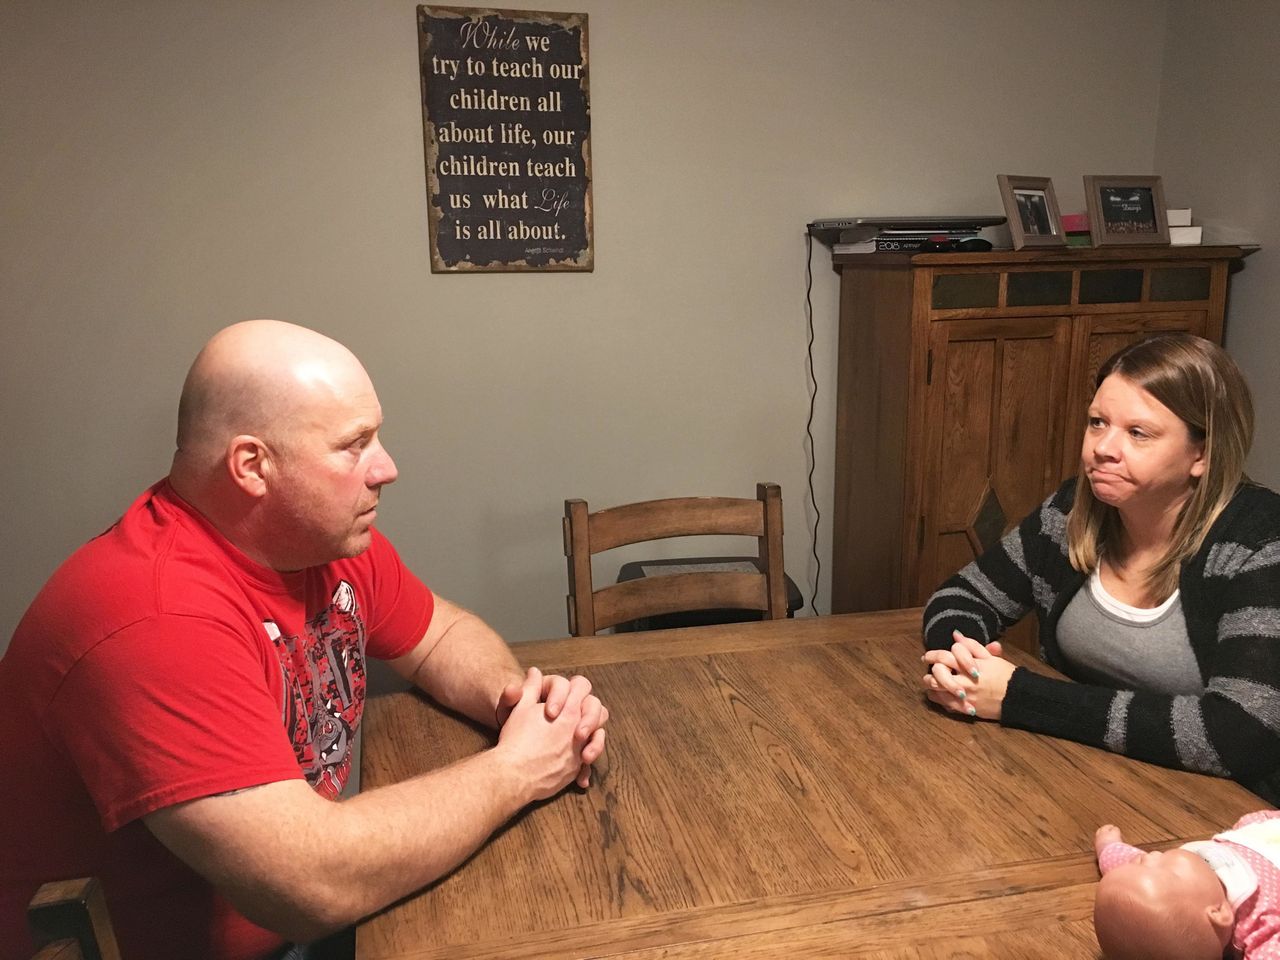 Tracy and Danielle Lammers, sitting in their dining room two weeks after learning Medi-Share considered Danielle's cancer a pre-existing condition and rejected payment for treatment. Medi-Share later reversed its decision, following their appeal.